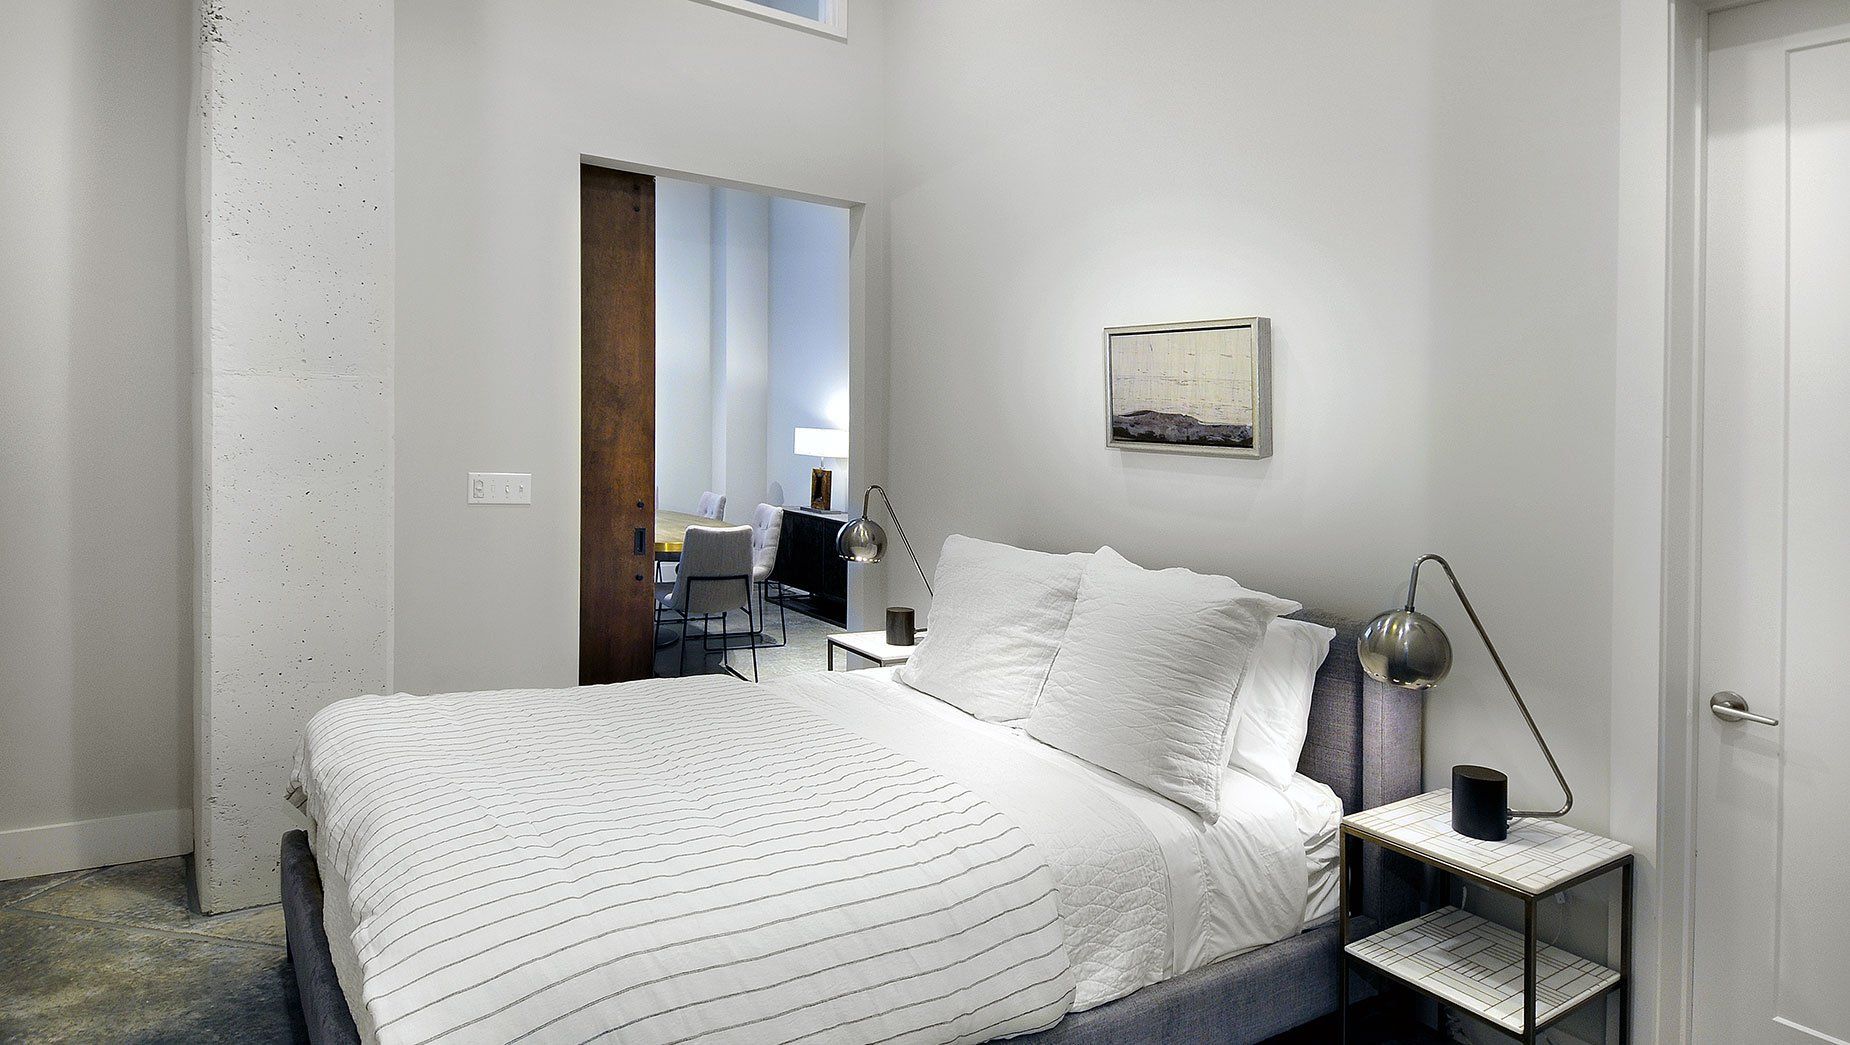 North and Line Modern Apartment Bedroom